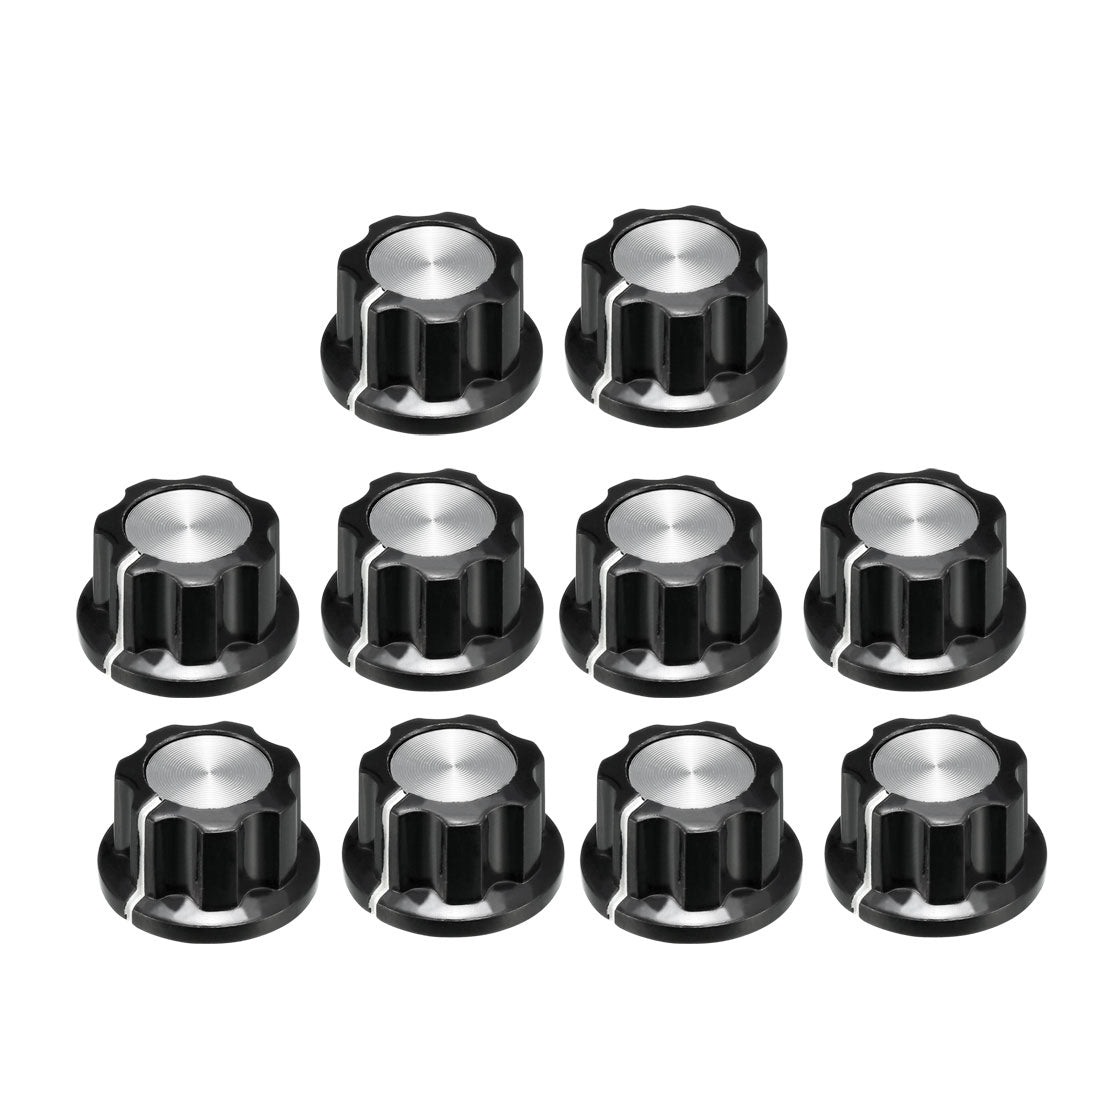 uxcell Uxcell 10Pcs 19.5x11.5mm Silver Tone Top Potentiometer Volume Control Rotary Knobs 6mm Shaft Hole